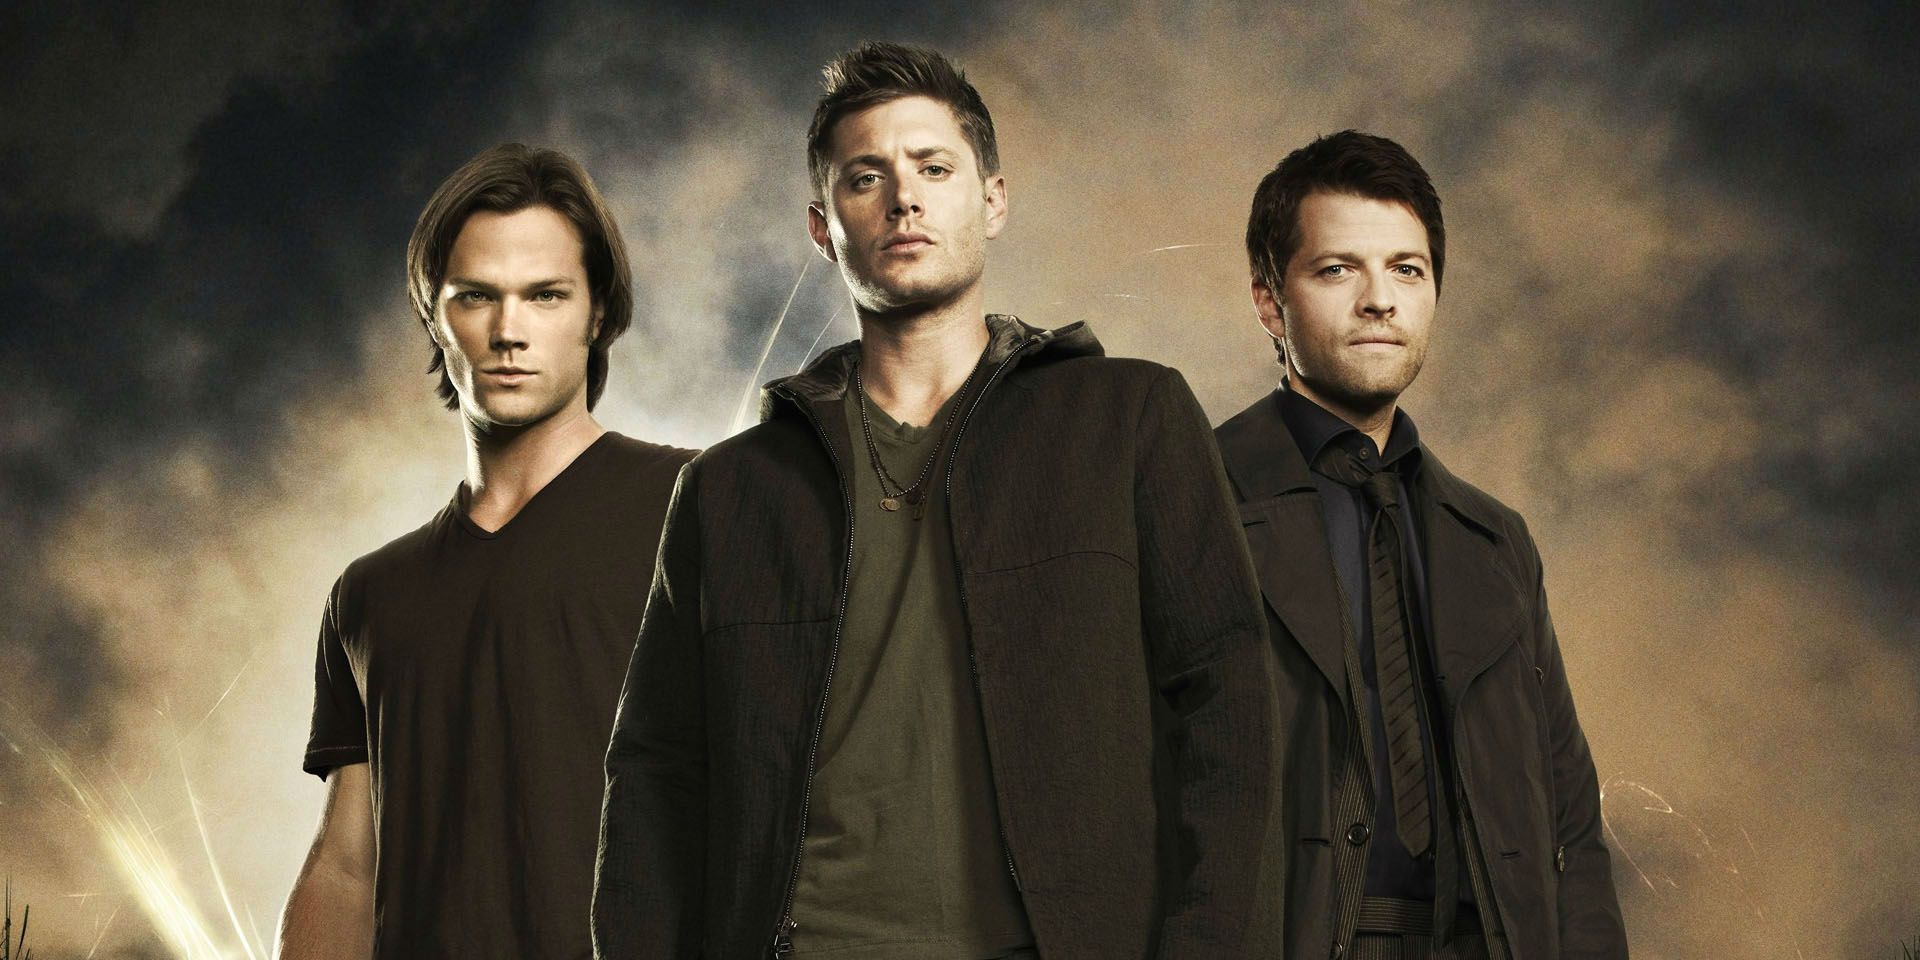 Supernatural: Who Is Still Alive In Season 13?